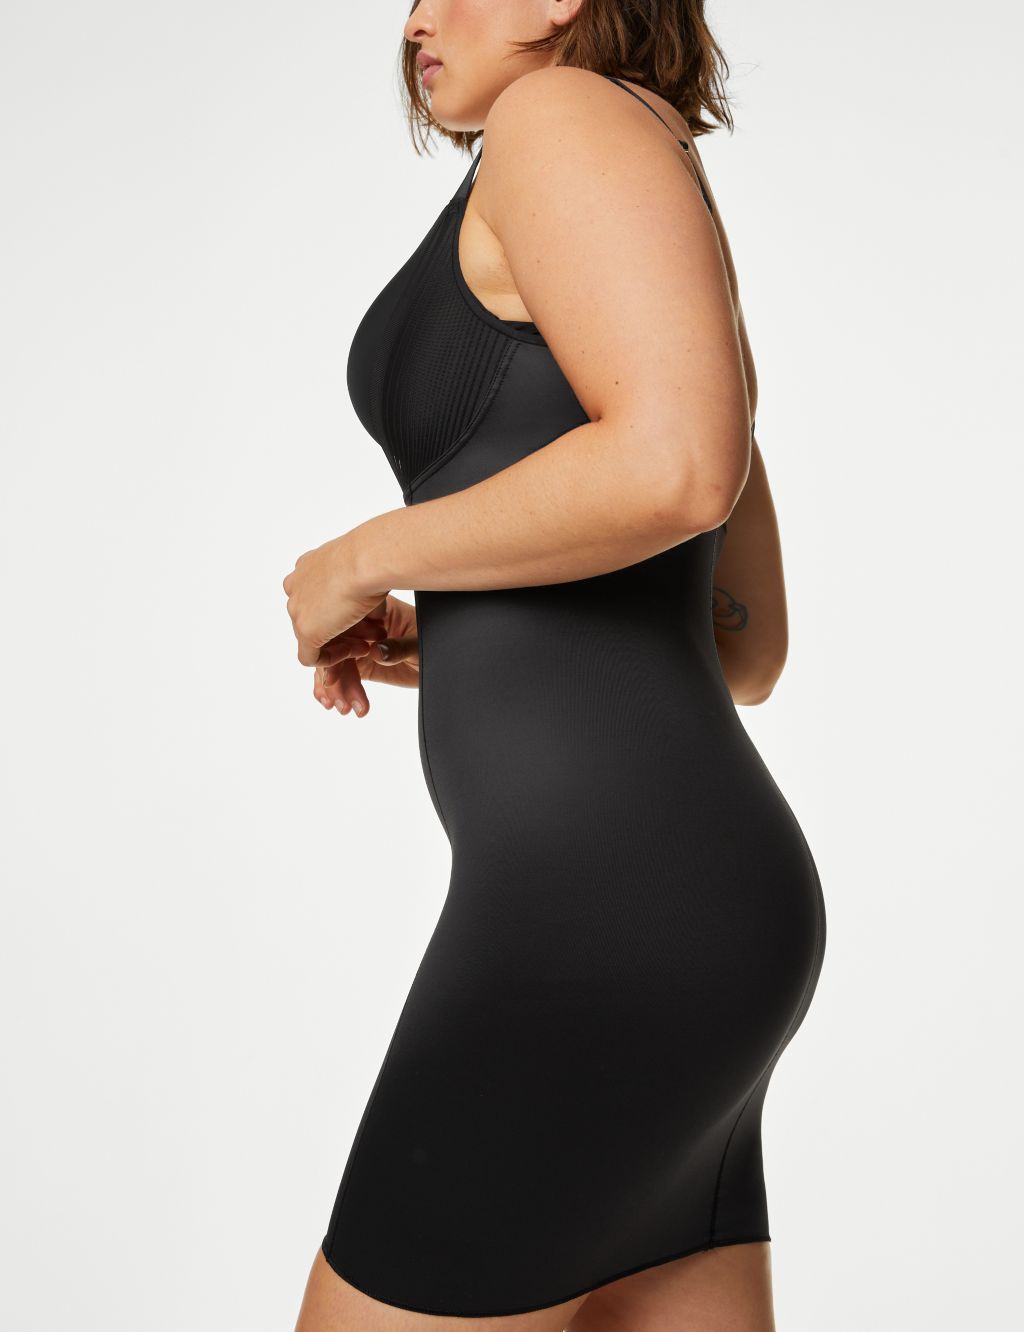 Body Define™ Firm Control Shaping Slip image 3